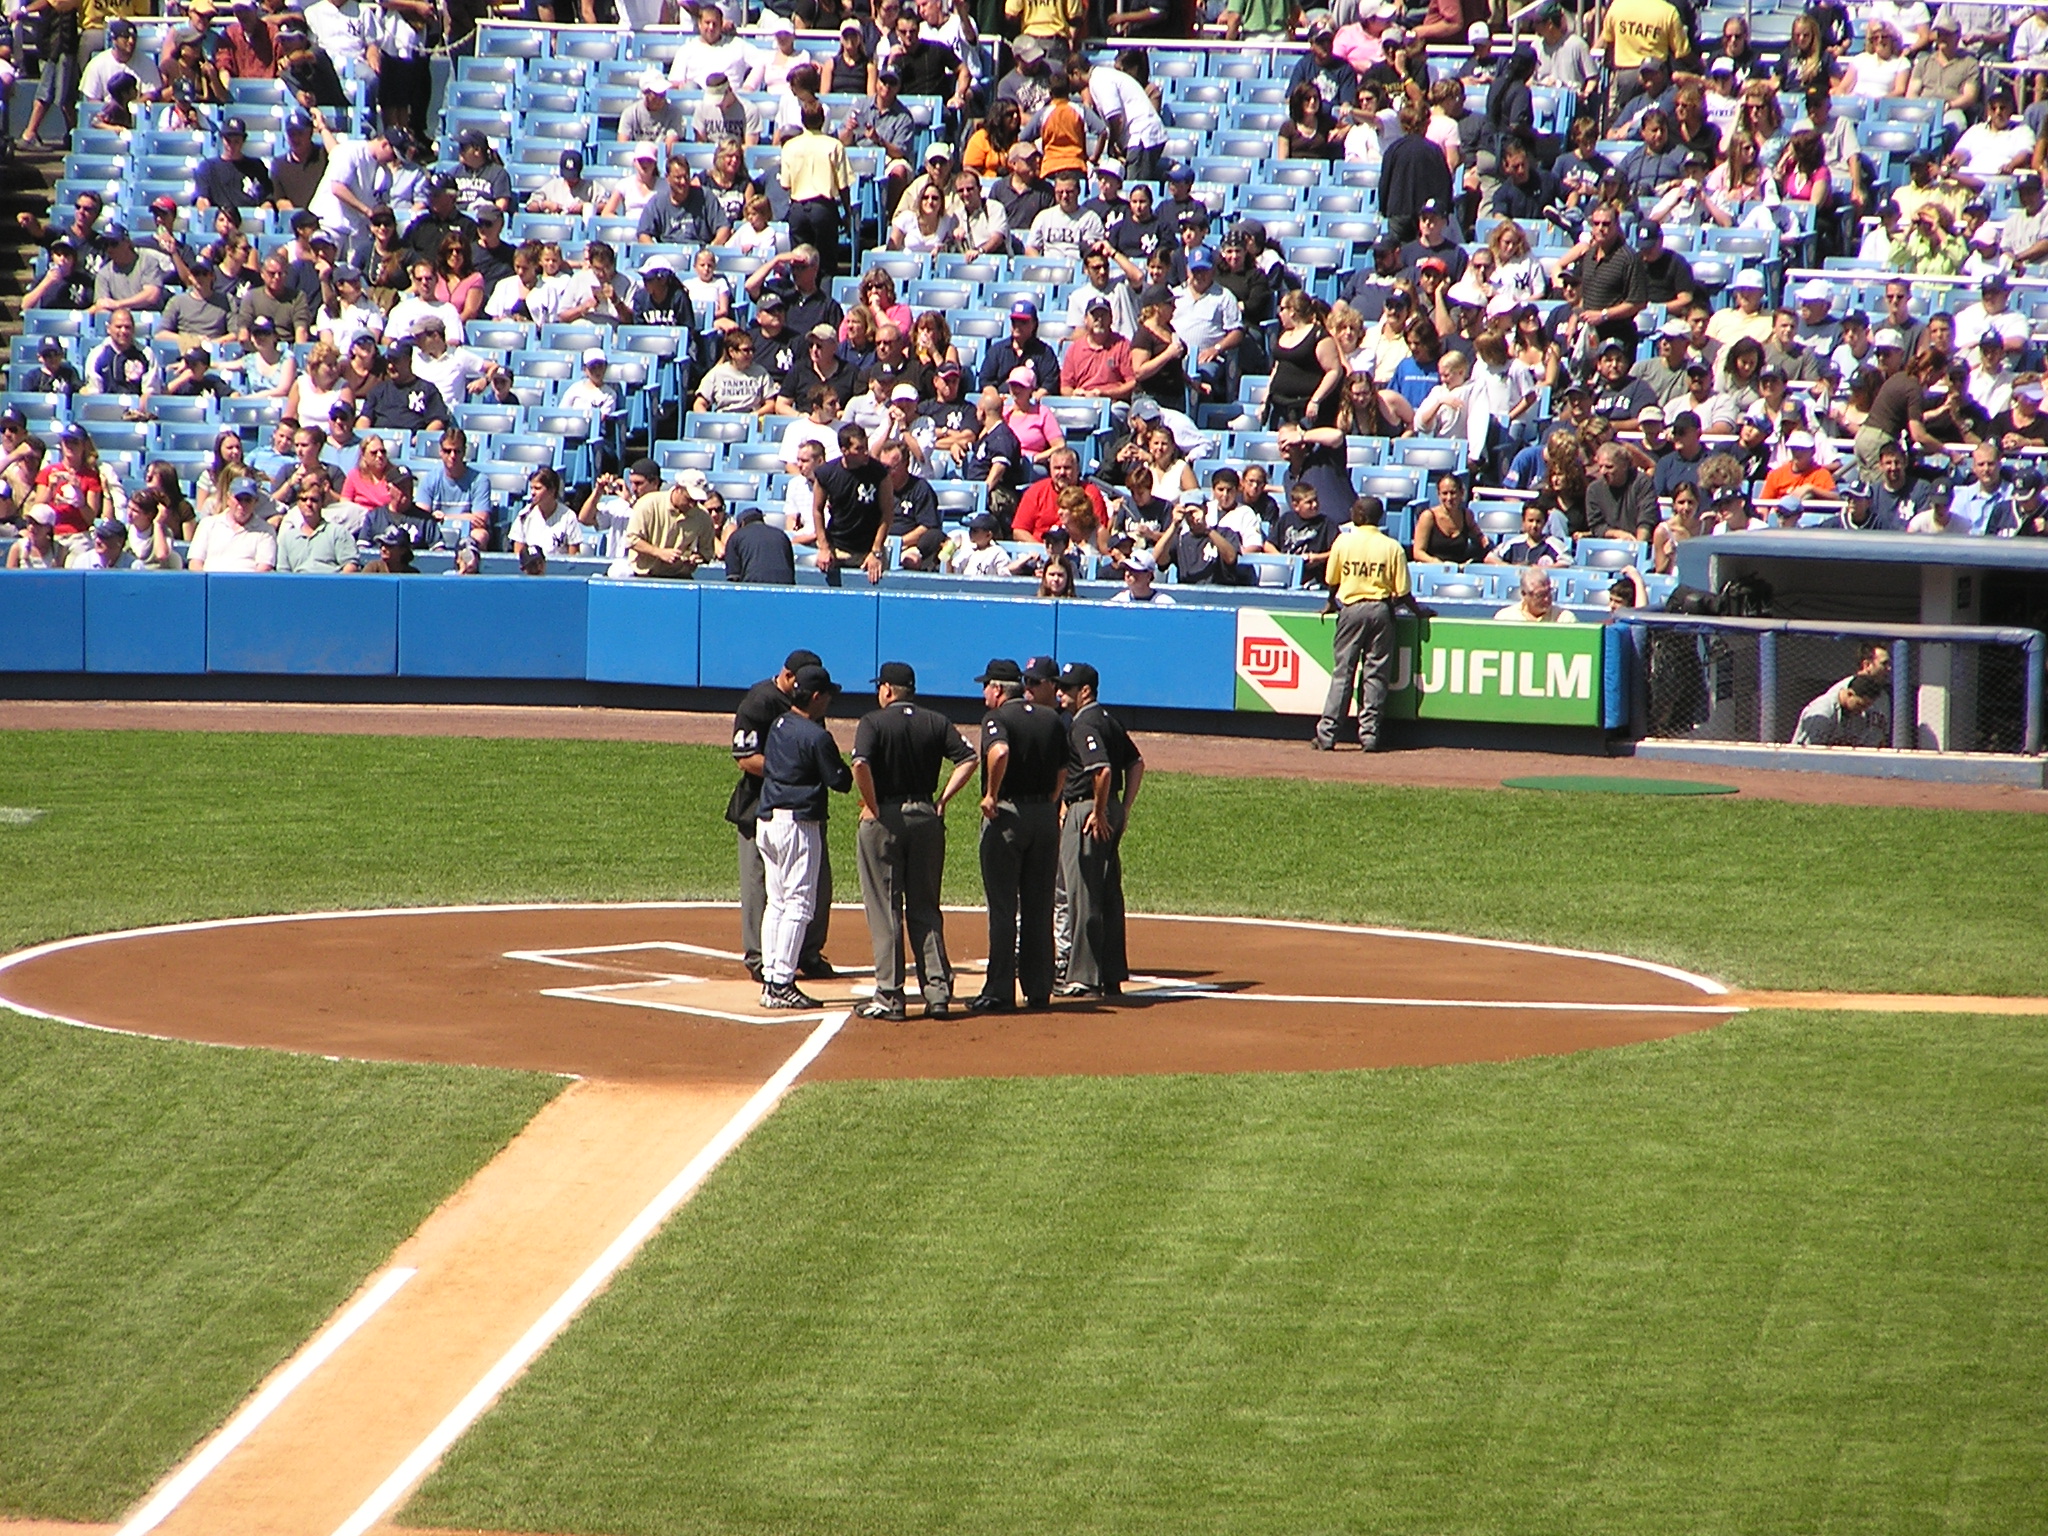 Exchanging the Line Up cards at The Stadium